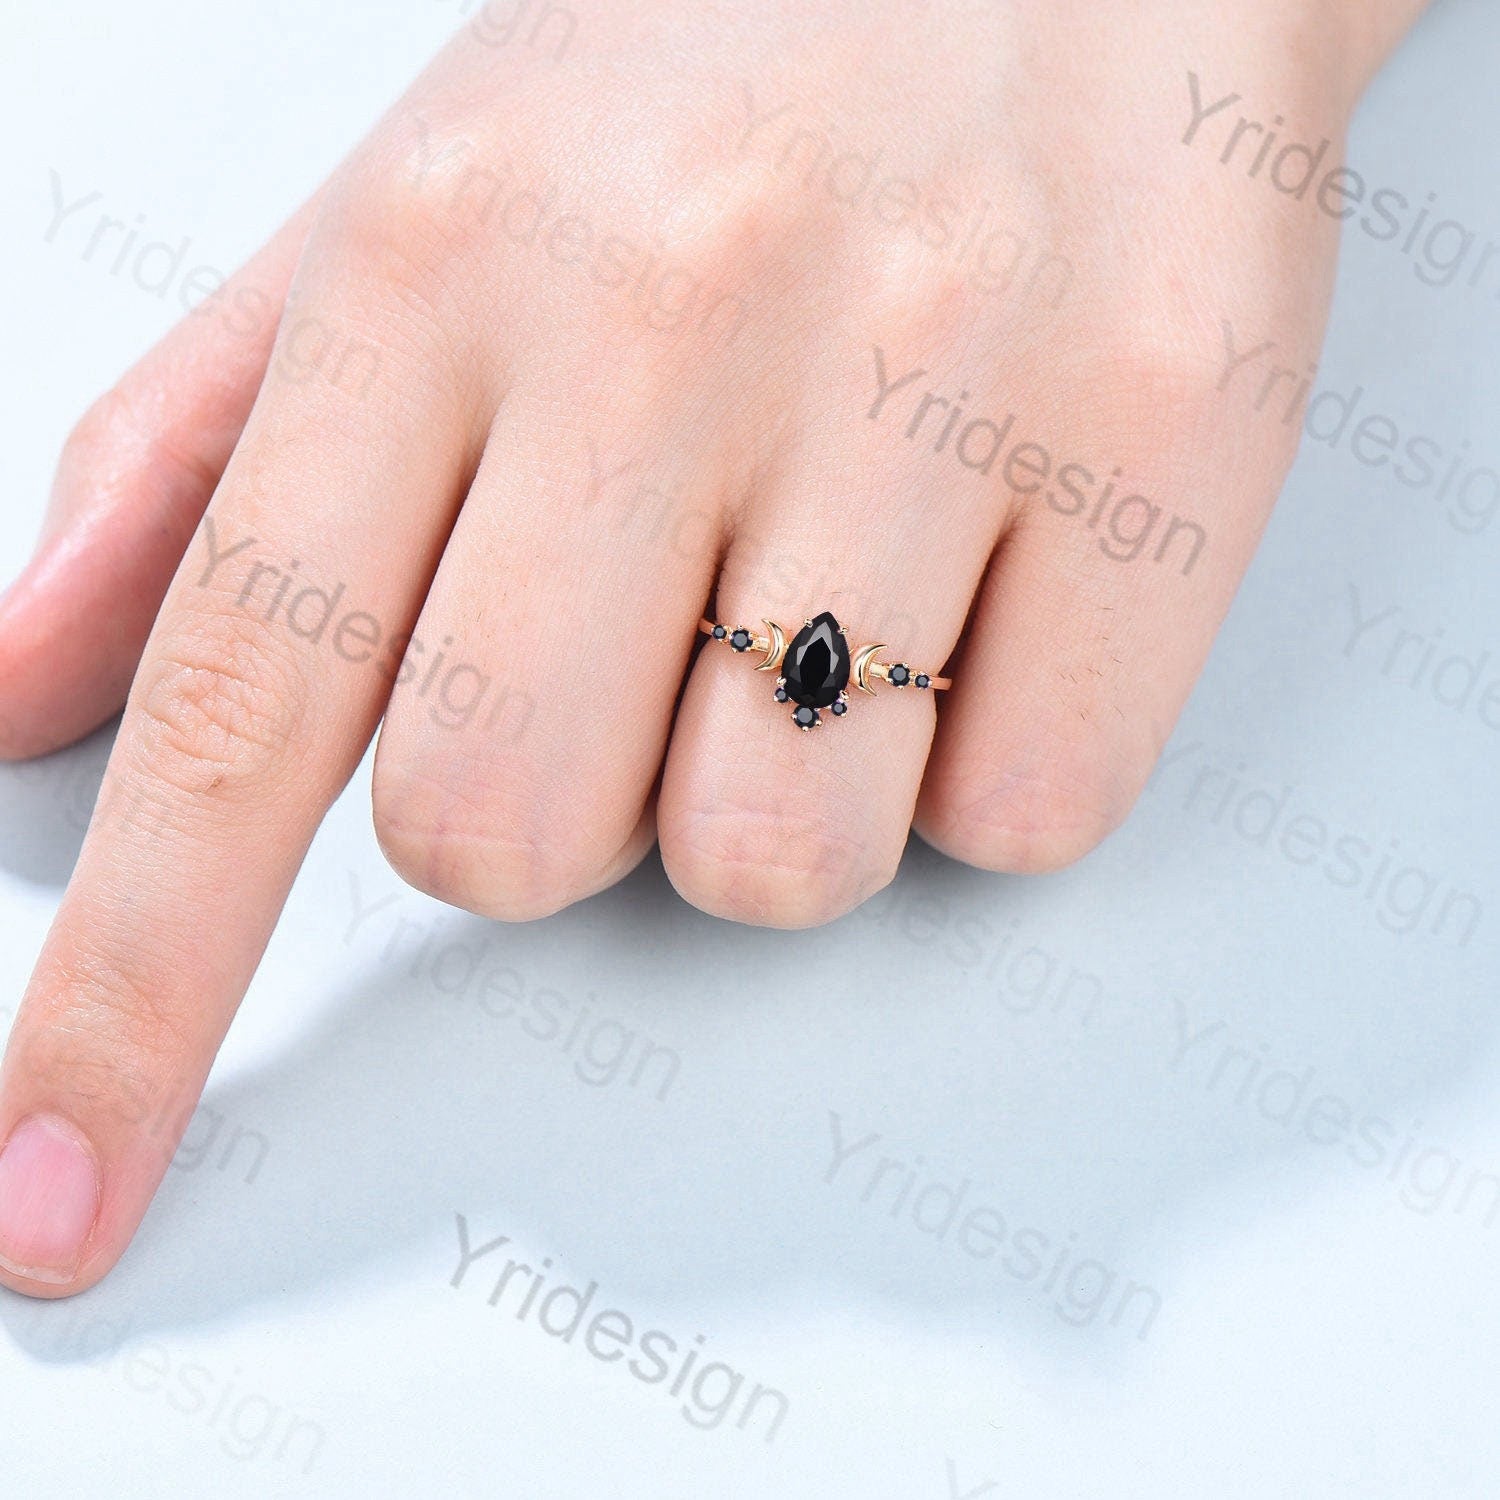 Premium Photo | A black diamond set in a ring is worn by a girl's hand